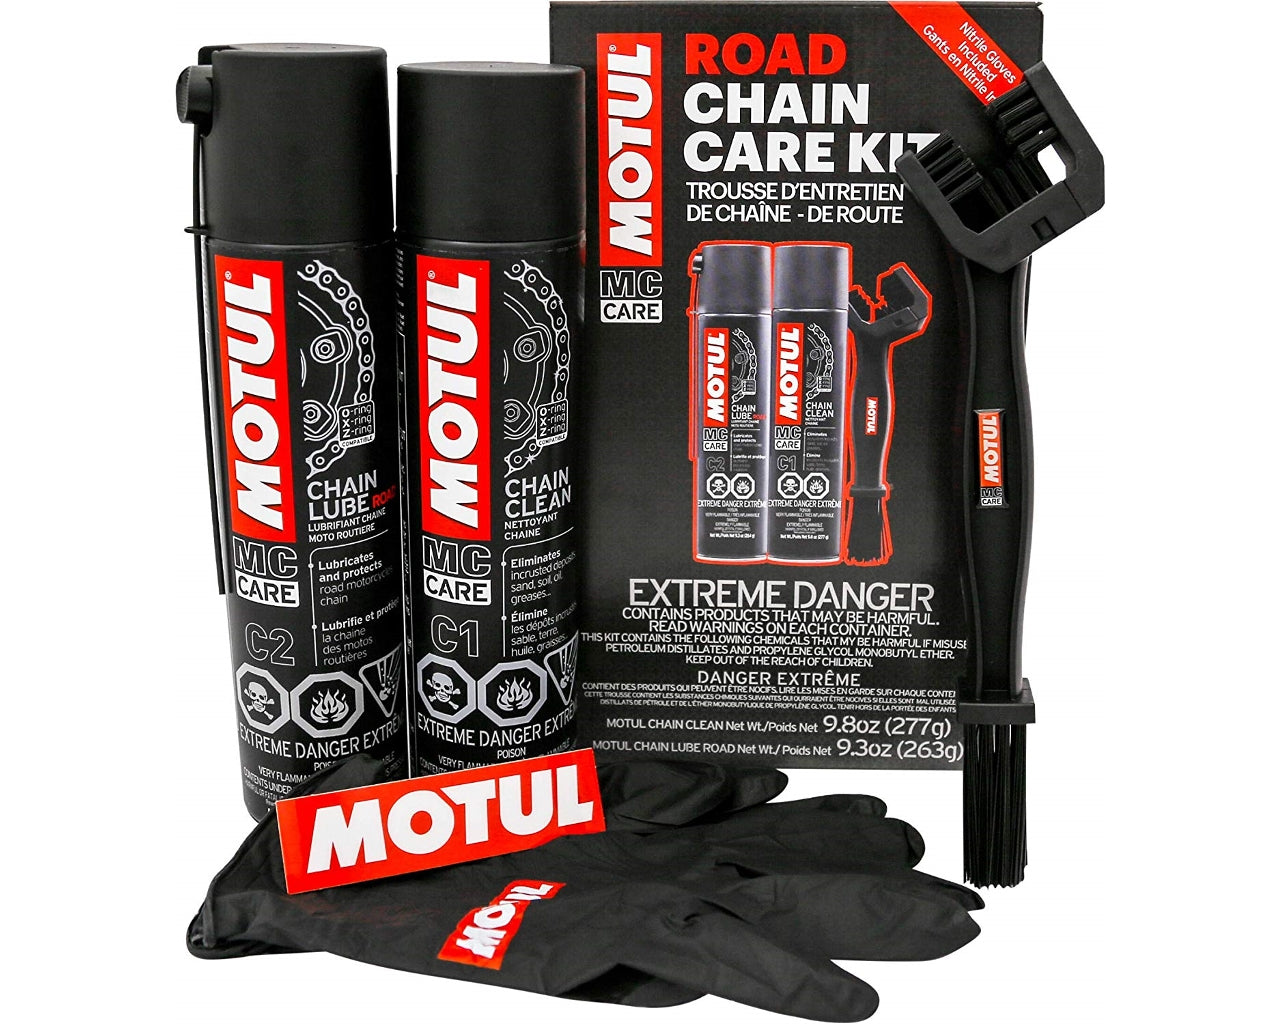 Motul Road Street Motorcycle Chain Care Kit with Gloves 109767